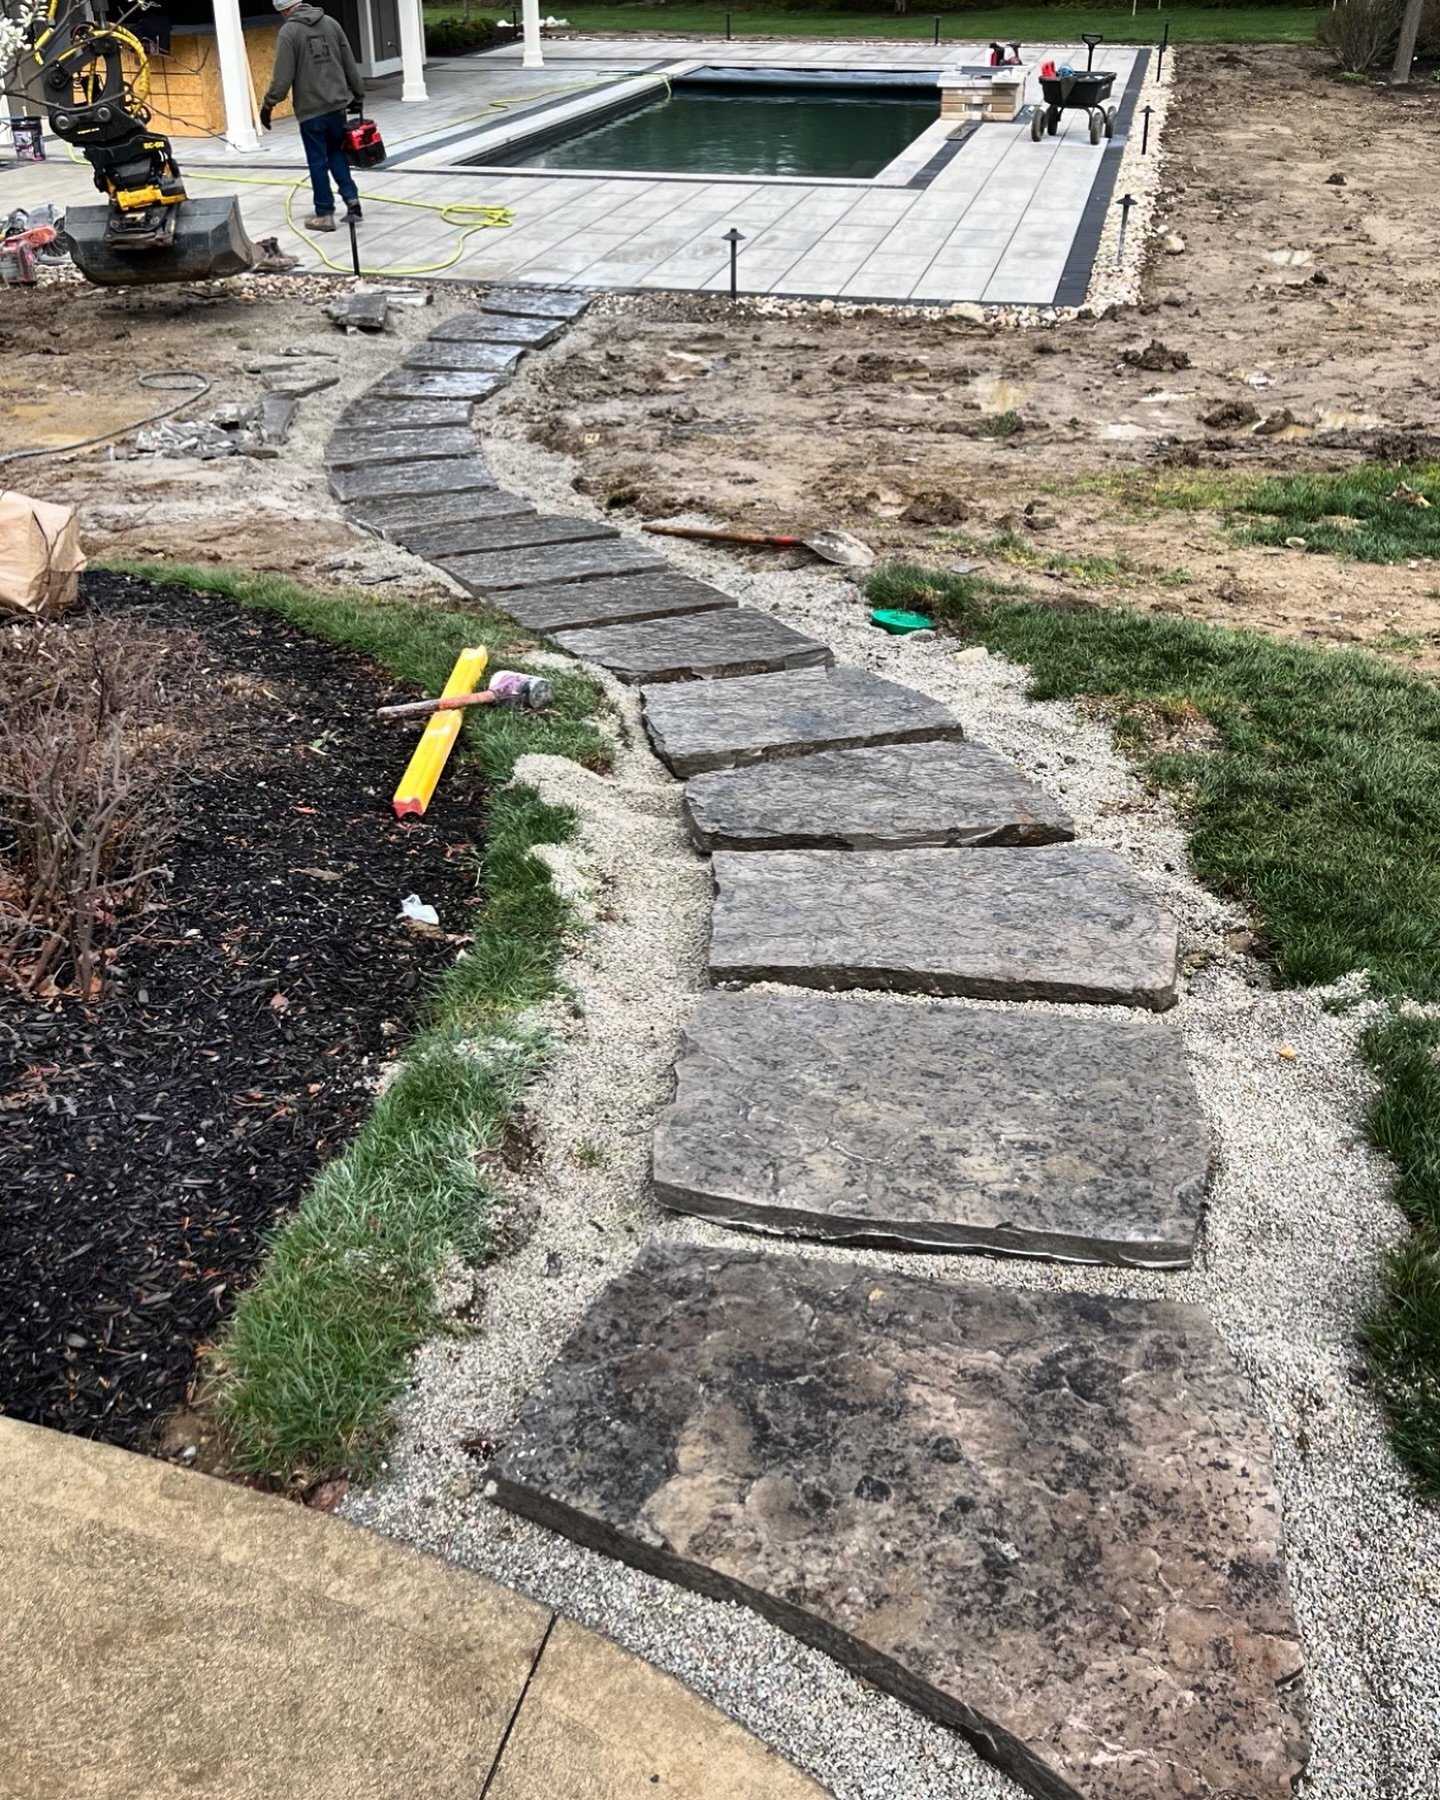 Natural flagstone walkway in progress. 

This pathway will cut through the lawn and keep feet clean going back and forth to the pool. After the irrigation is installed we will remove a lot of the bedding between the stones to allow for more soil dept